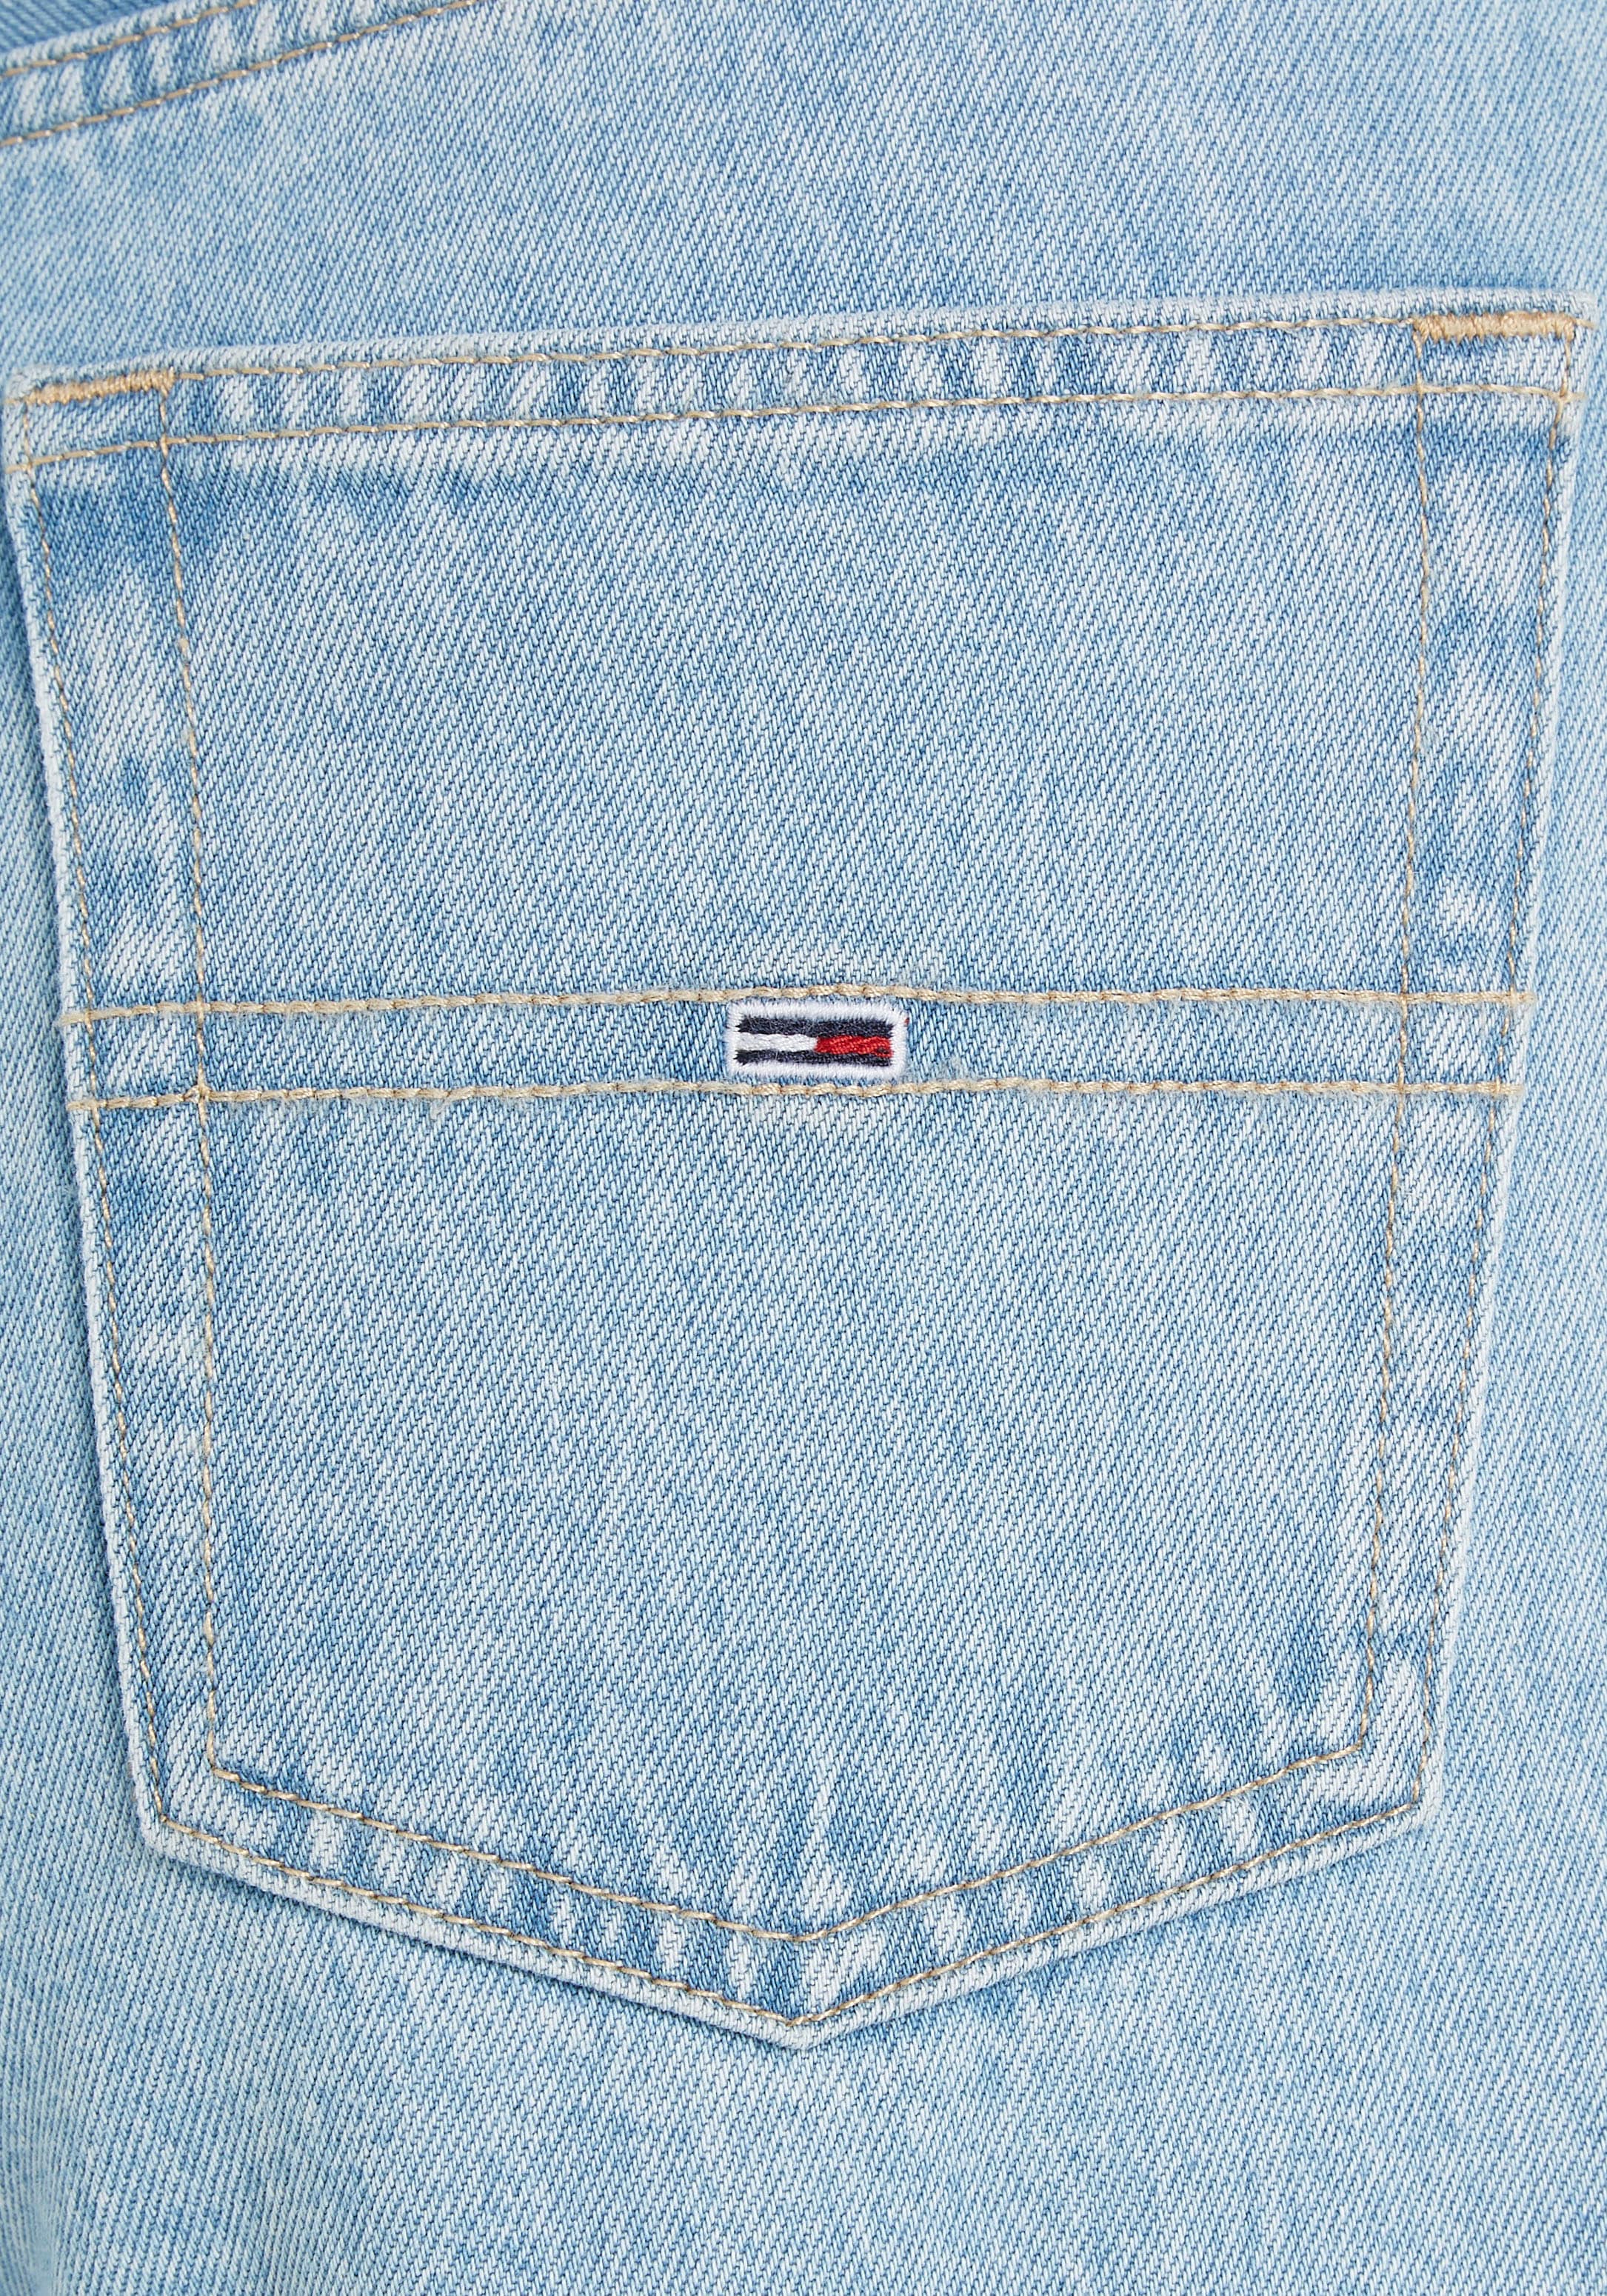 Tommy Jeans Weite Jeans, mit Tommy Jeans Logobadges online kaufen |  UNIVERSAL